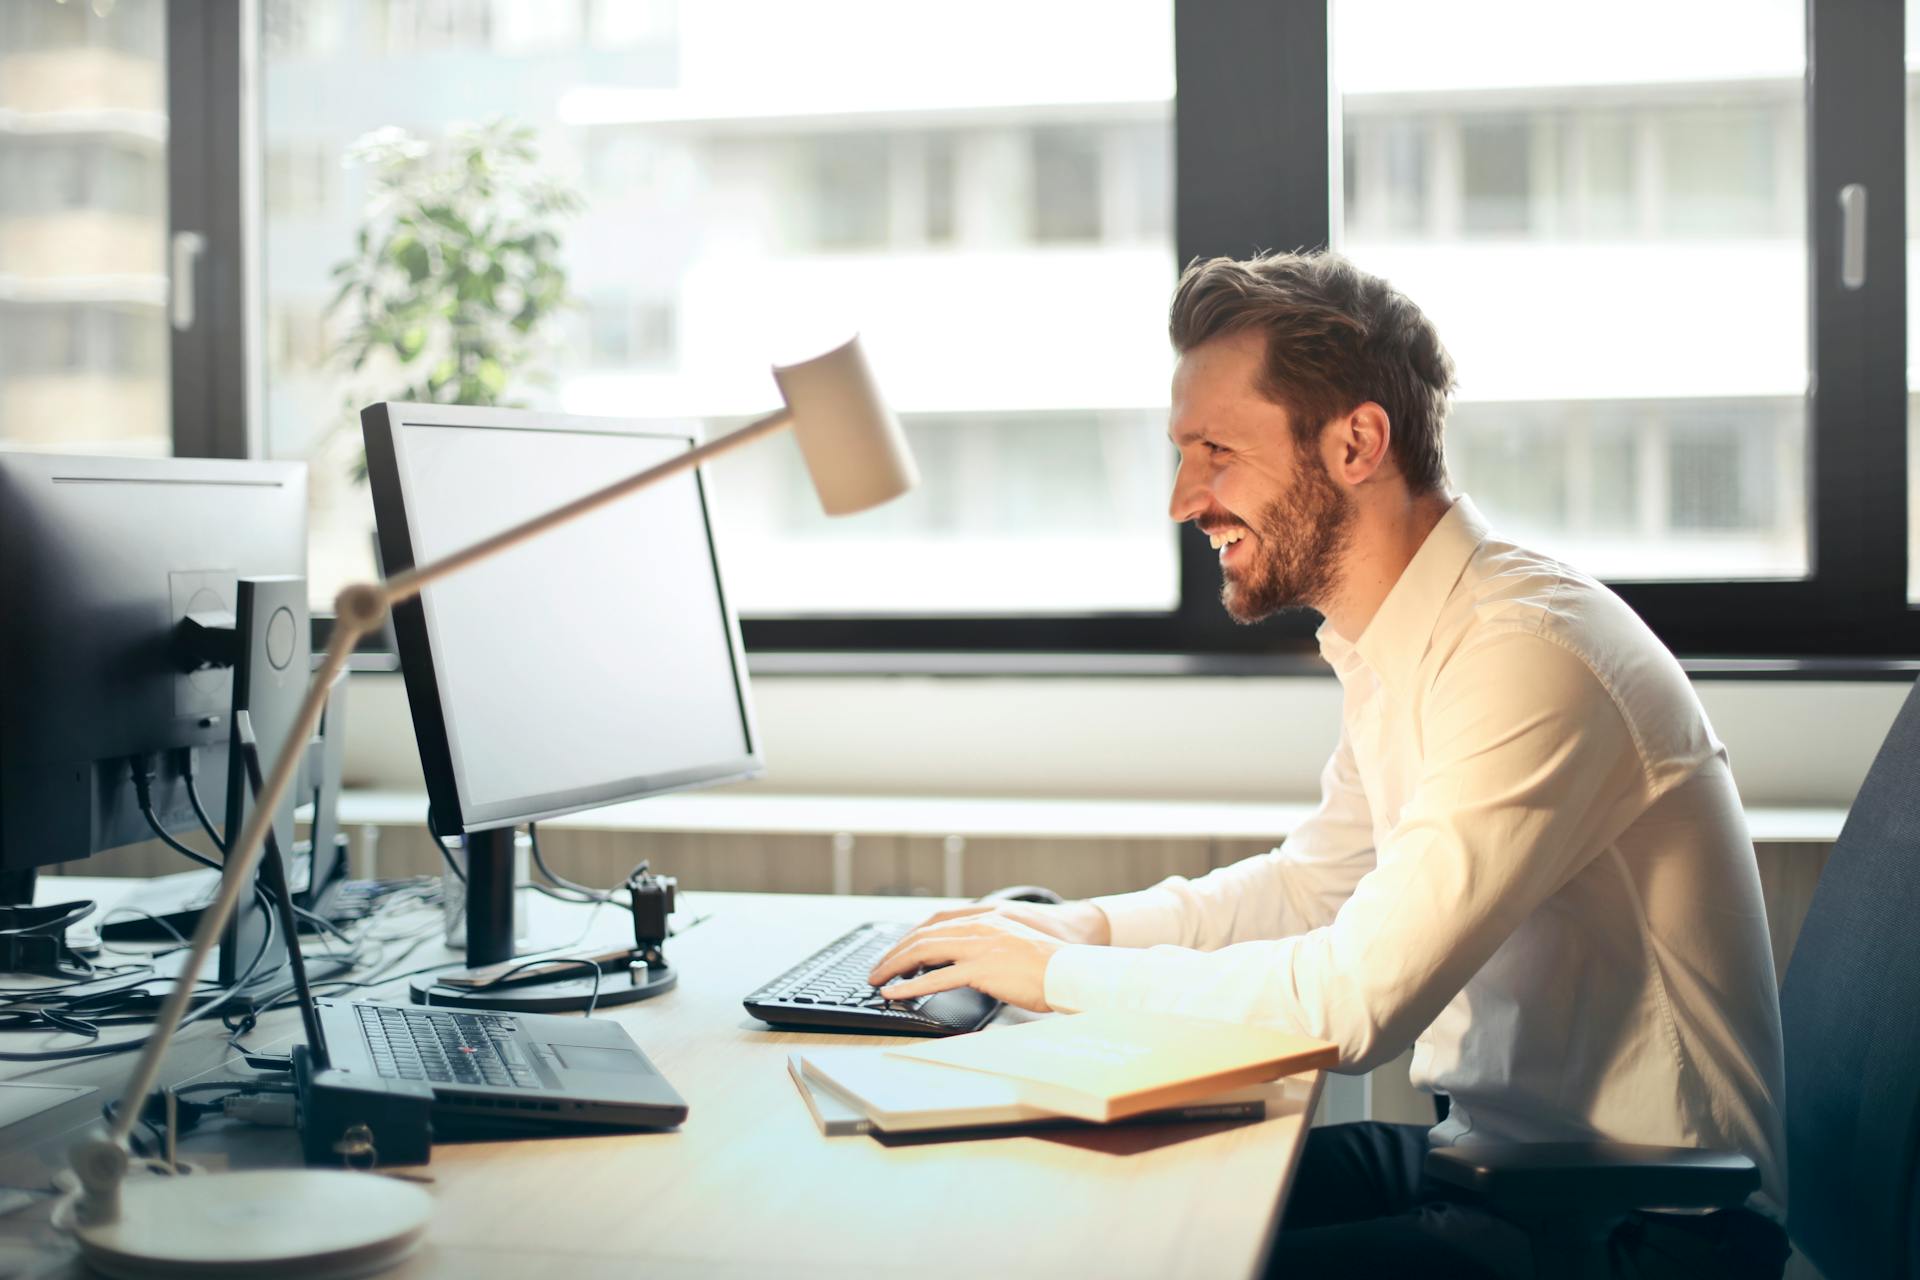 A man smiling while staring at a computer screen and typing on the keyboard | Source: Pexels